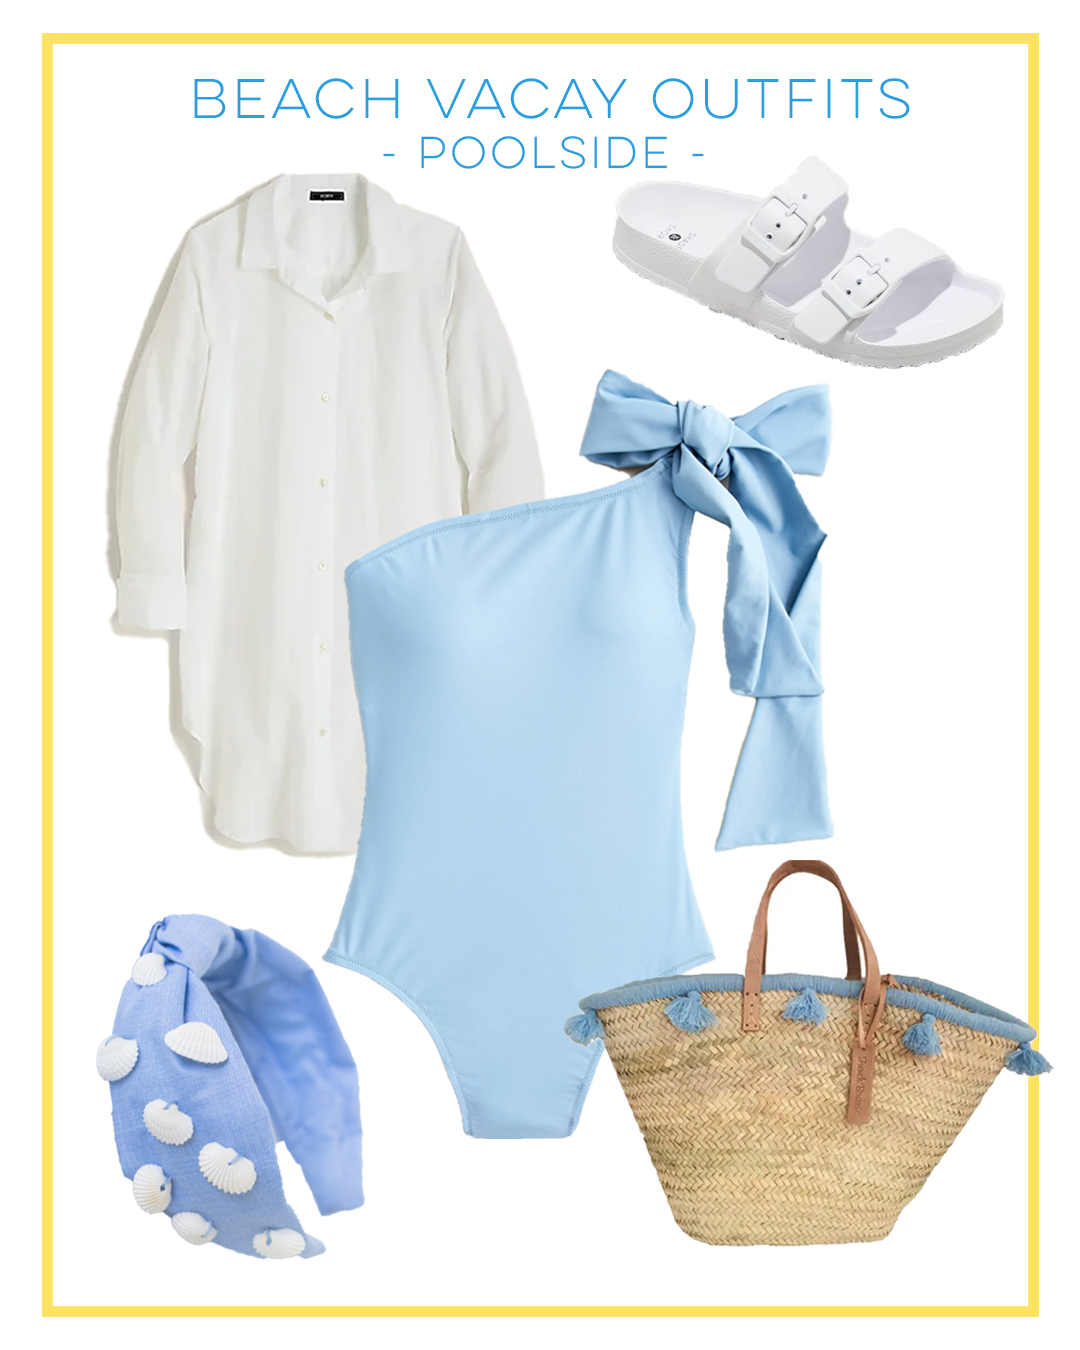 Beach Getaway Outfit Ideas in white and blue